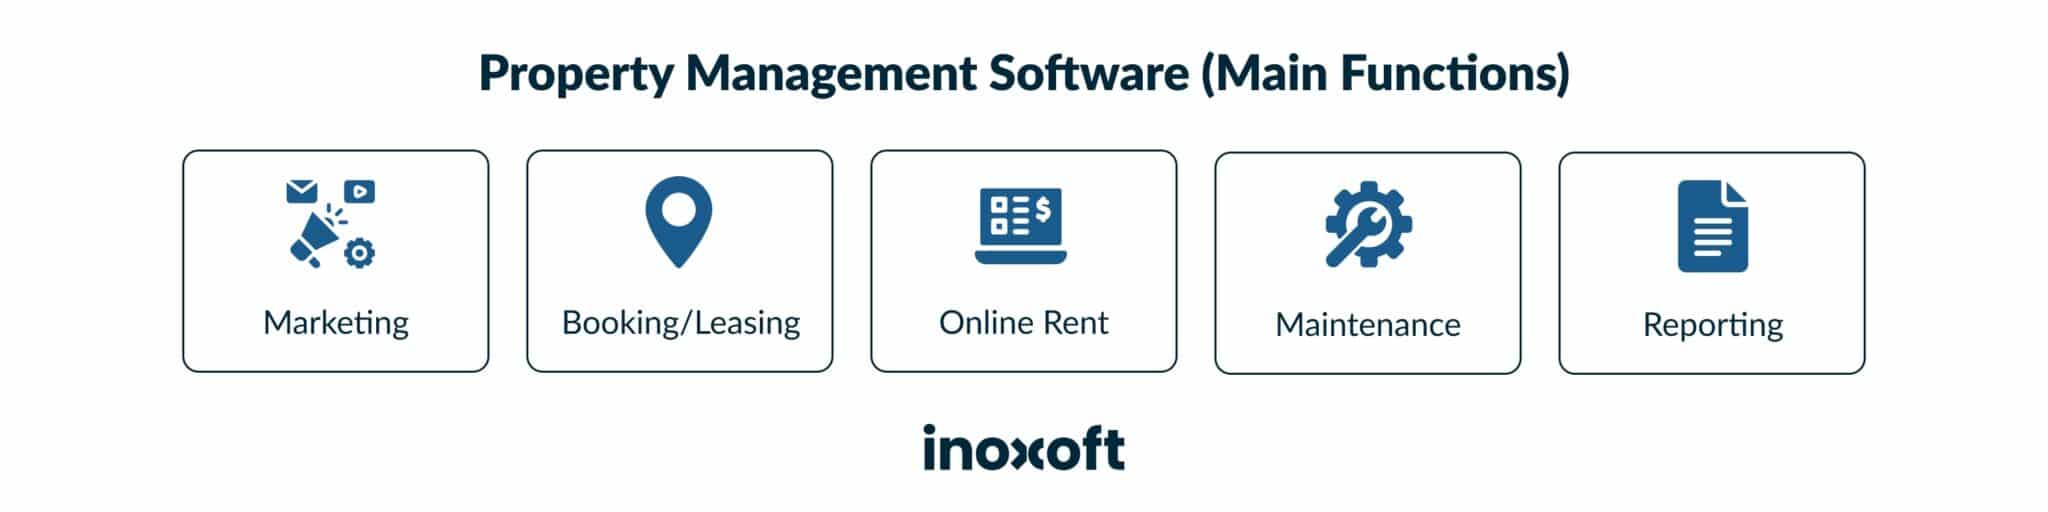 Main Functions of Property Management Software